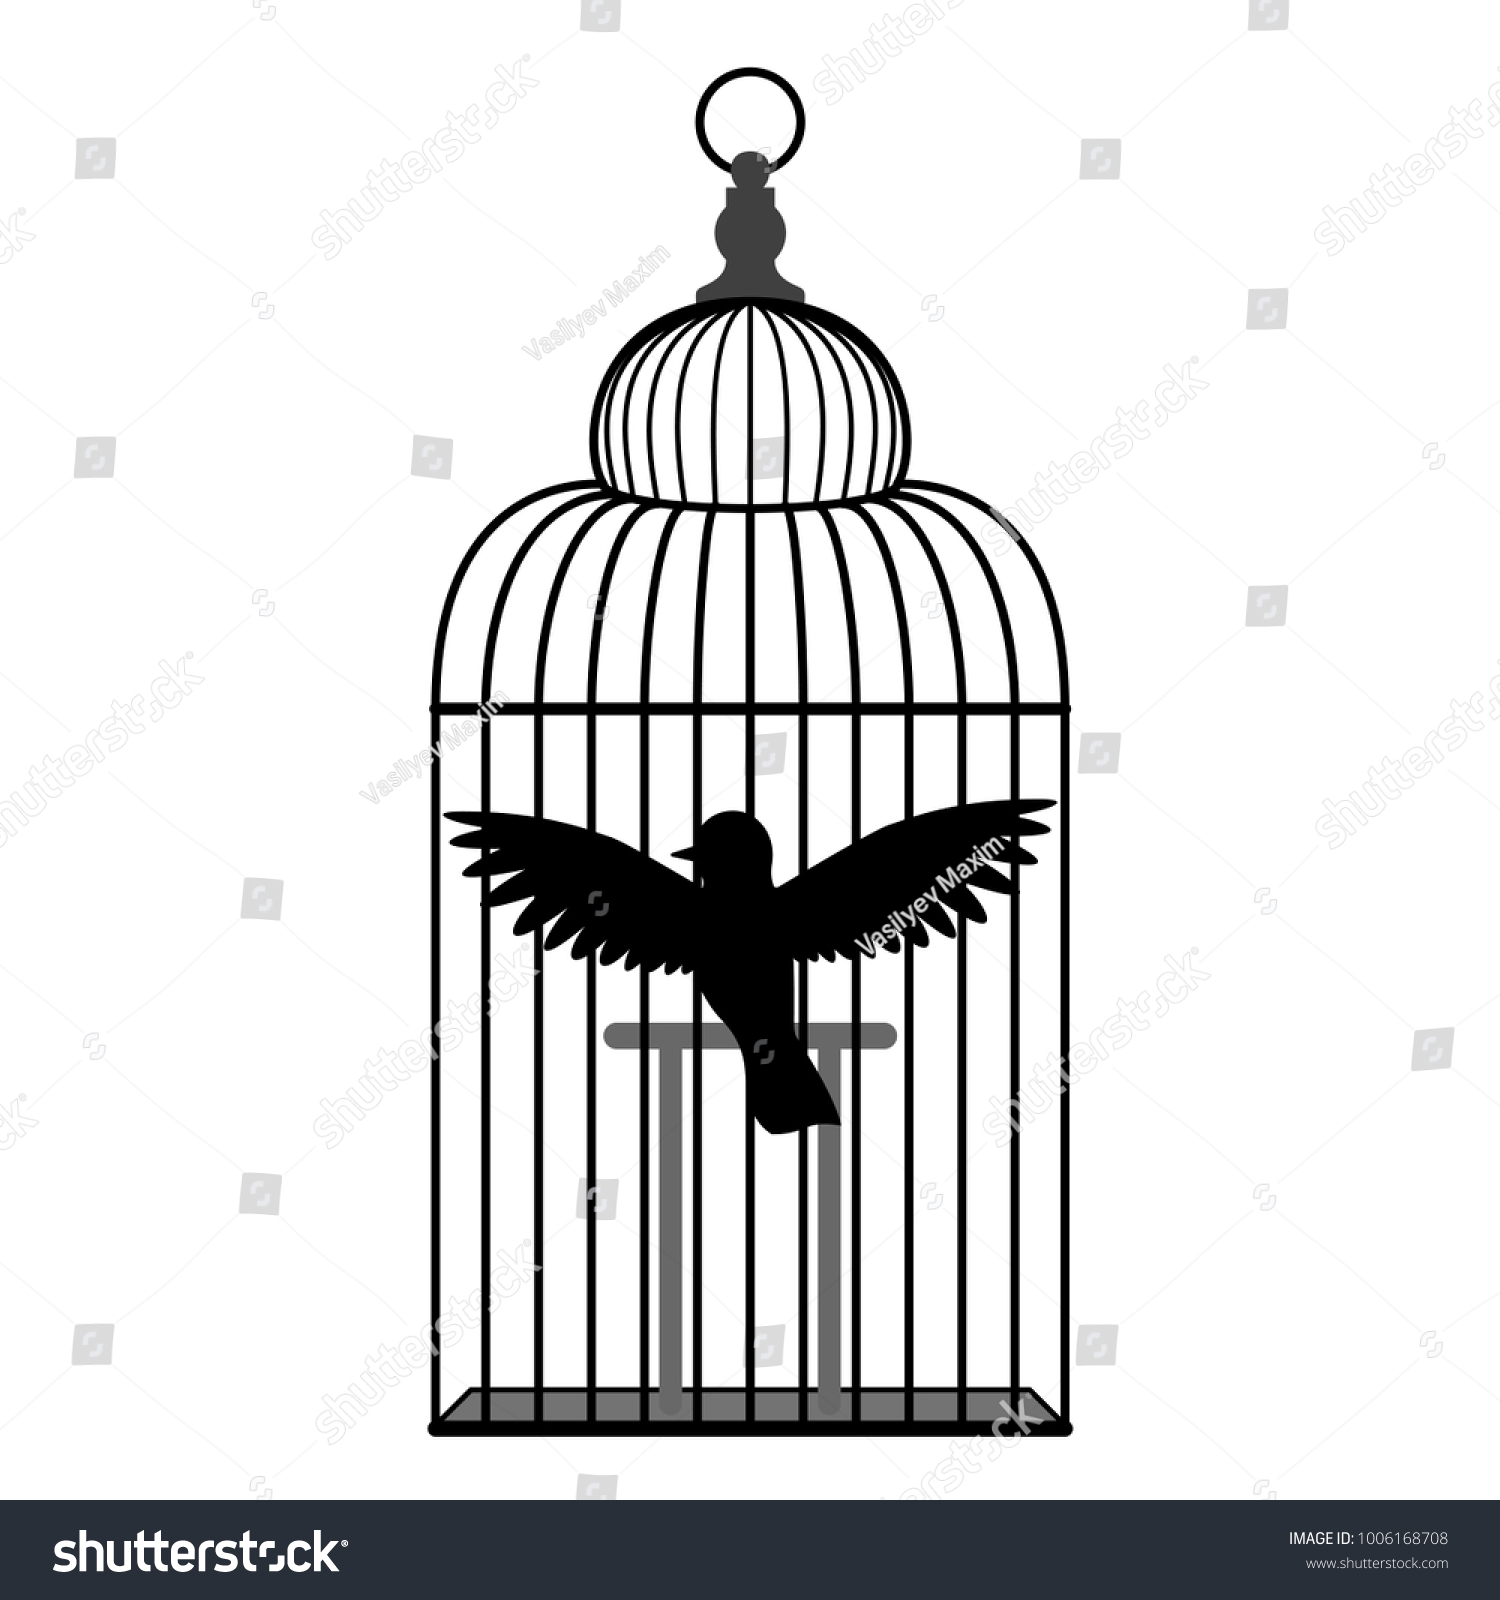 Simple Bird Cage Black White Silhouette Stock Vector (Royalty Free ...